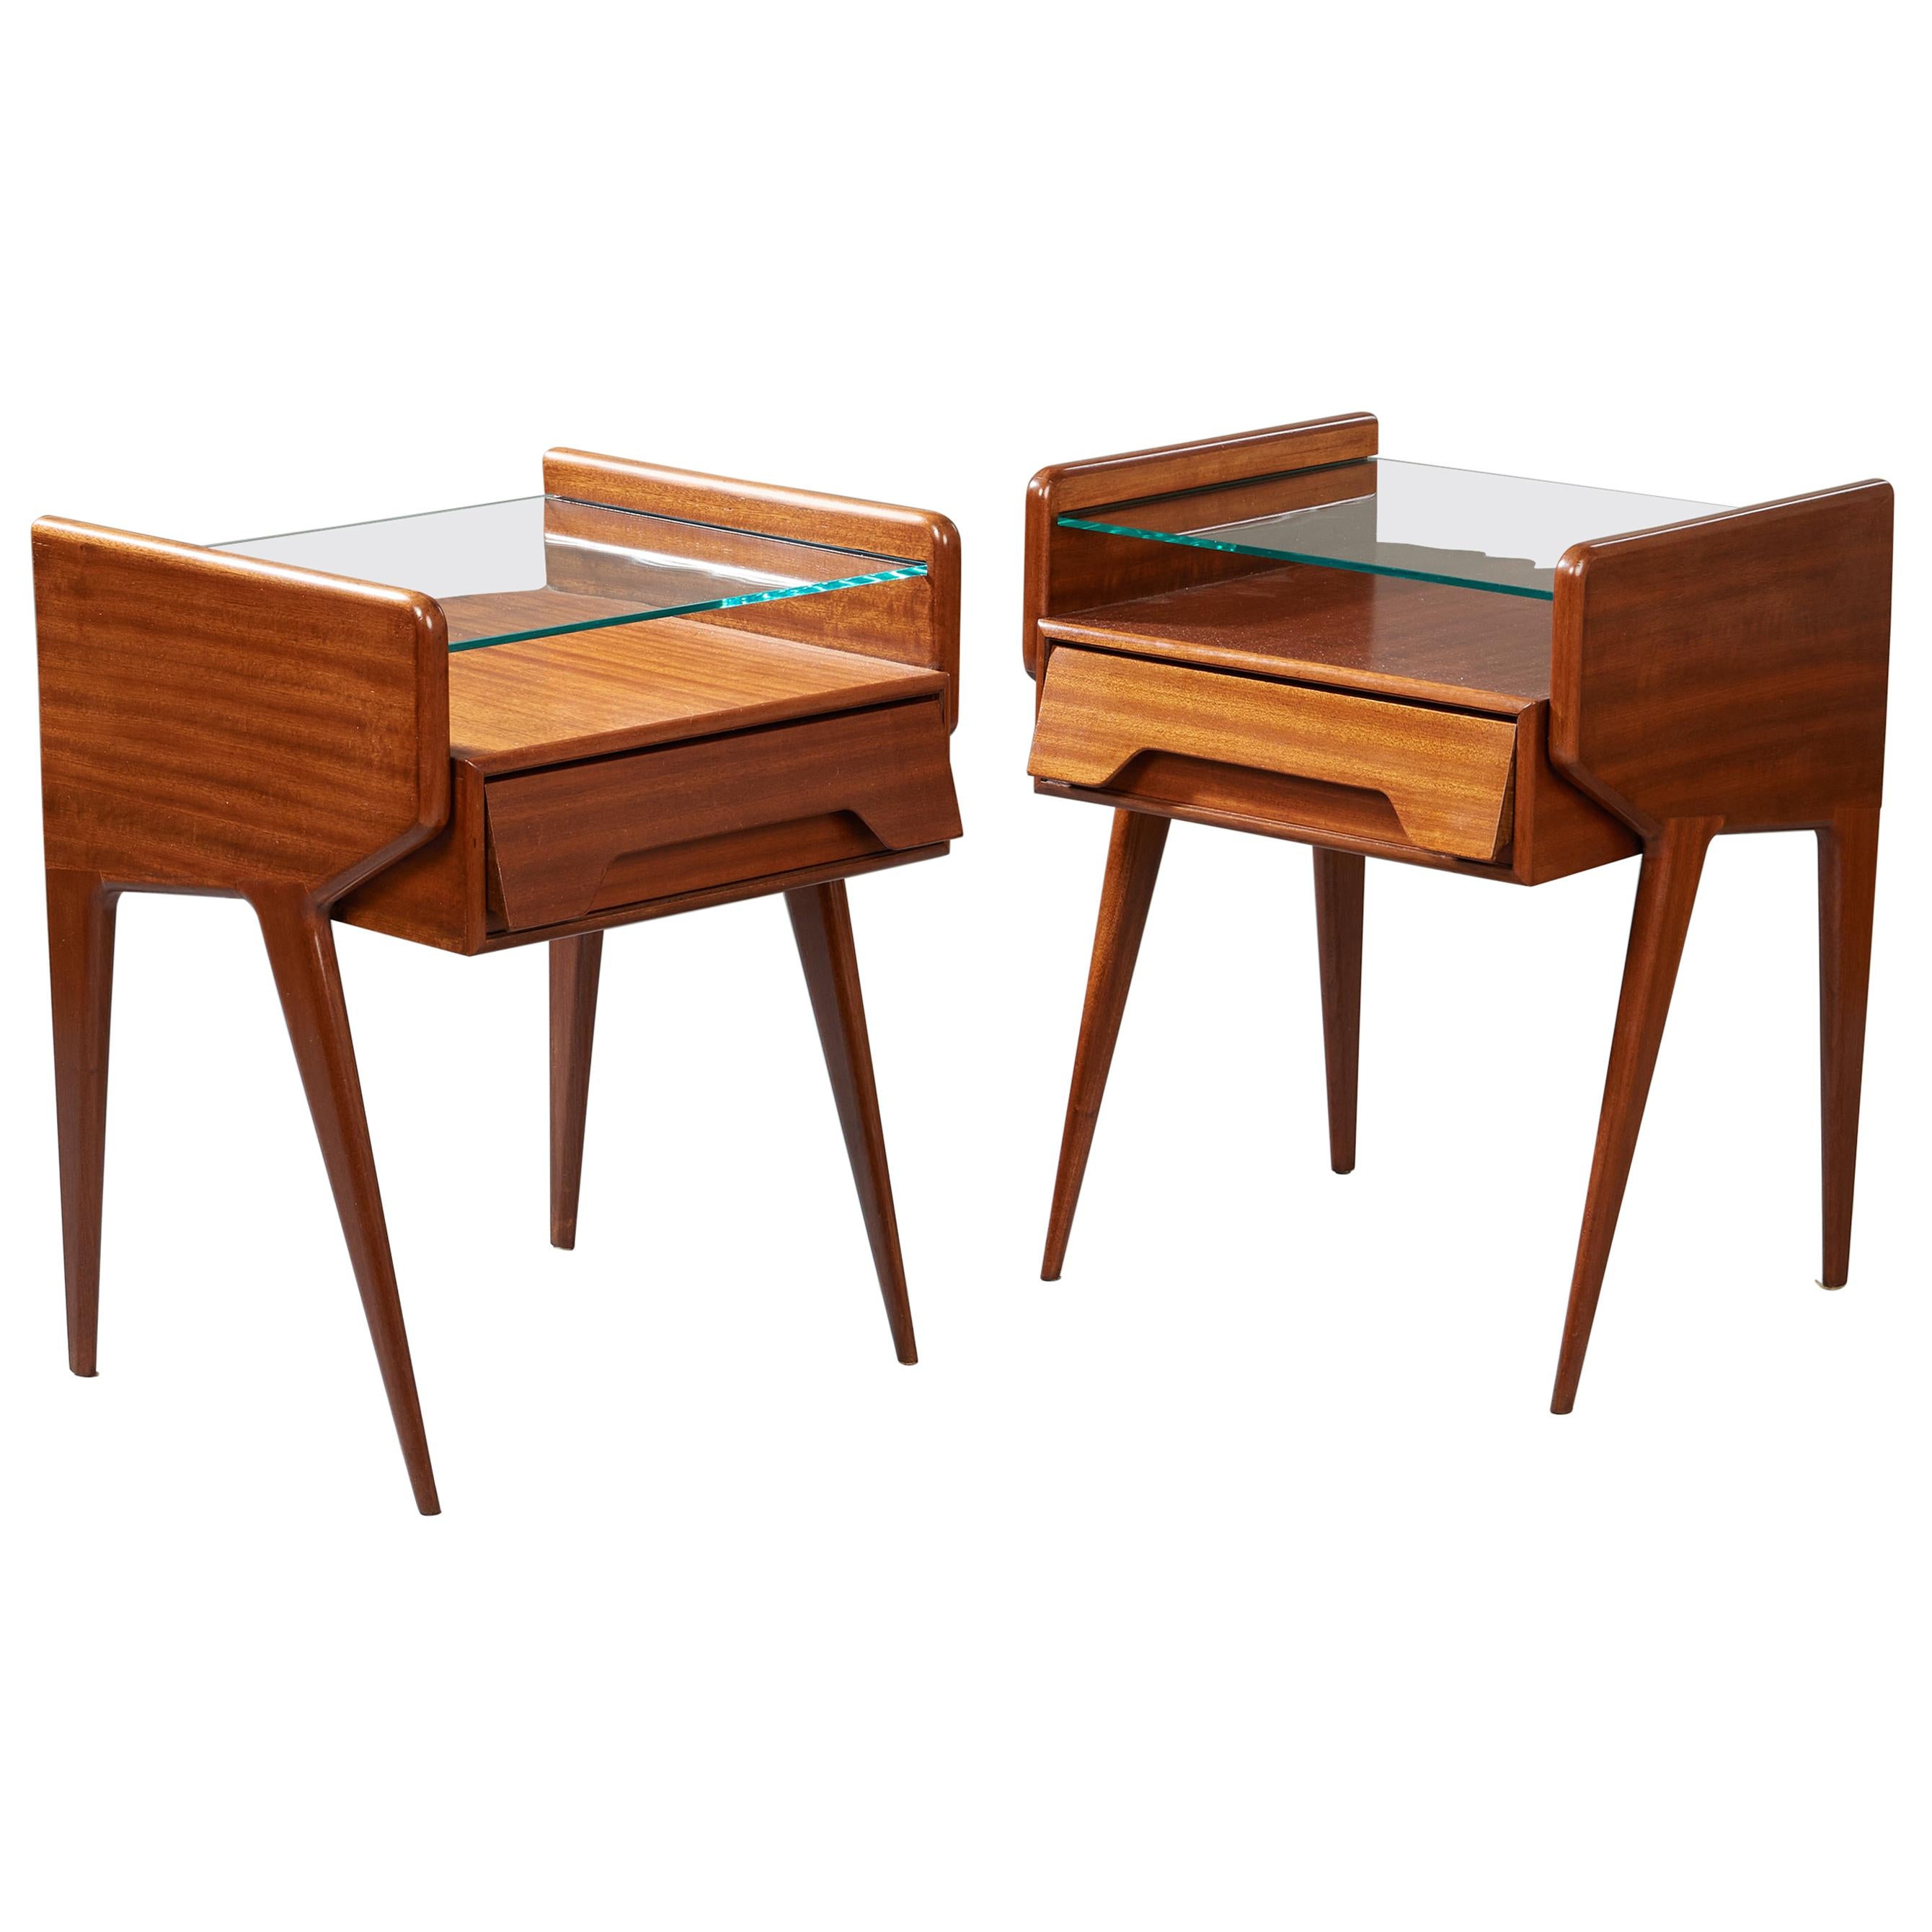 Pair of Organic Modern Mahogany & Glass Nightstands ITSO Ico Parisi, Italy 1950s For Sale